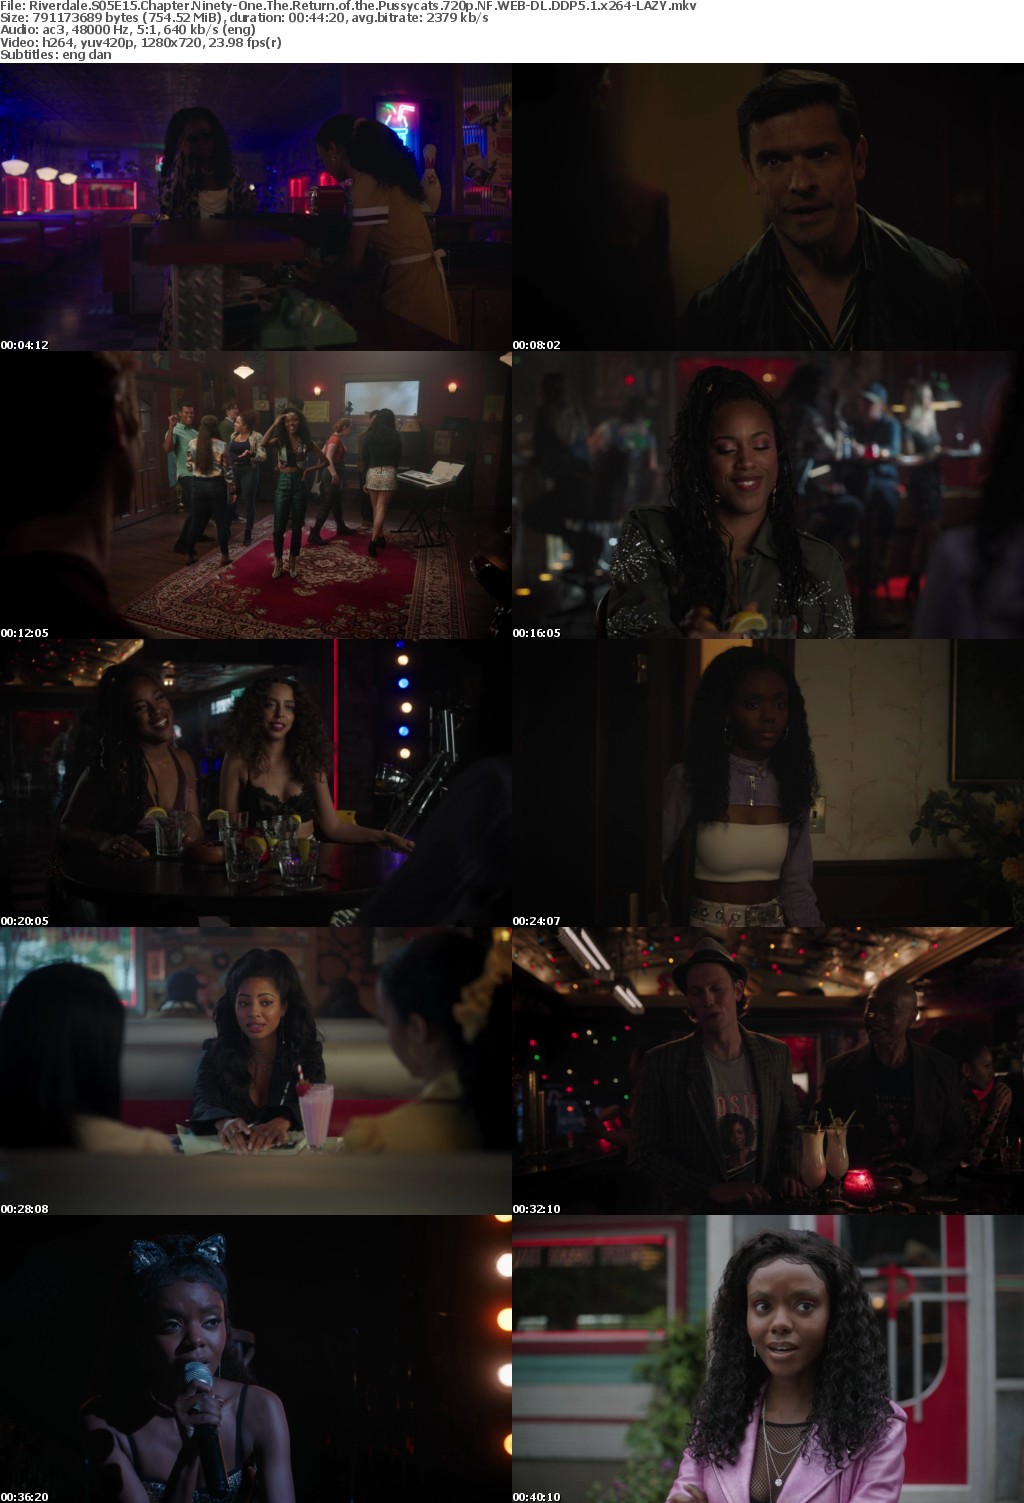 Riverdale US S05E15 Chapter Ninety-One The Return of the Pussycats 720p NF WEBRip DDP5 1 x264-LAZY